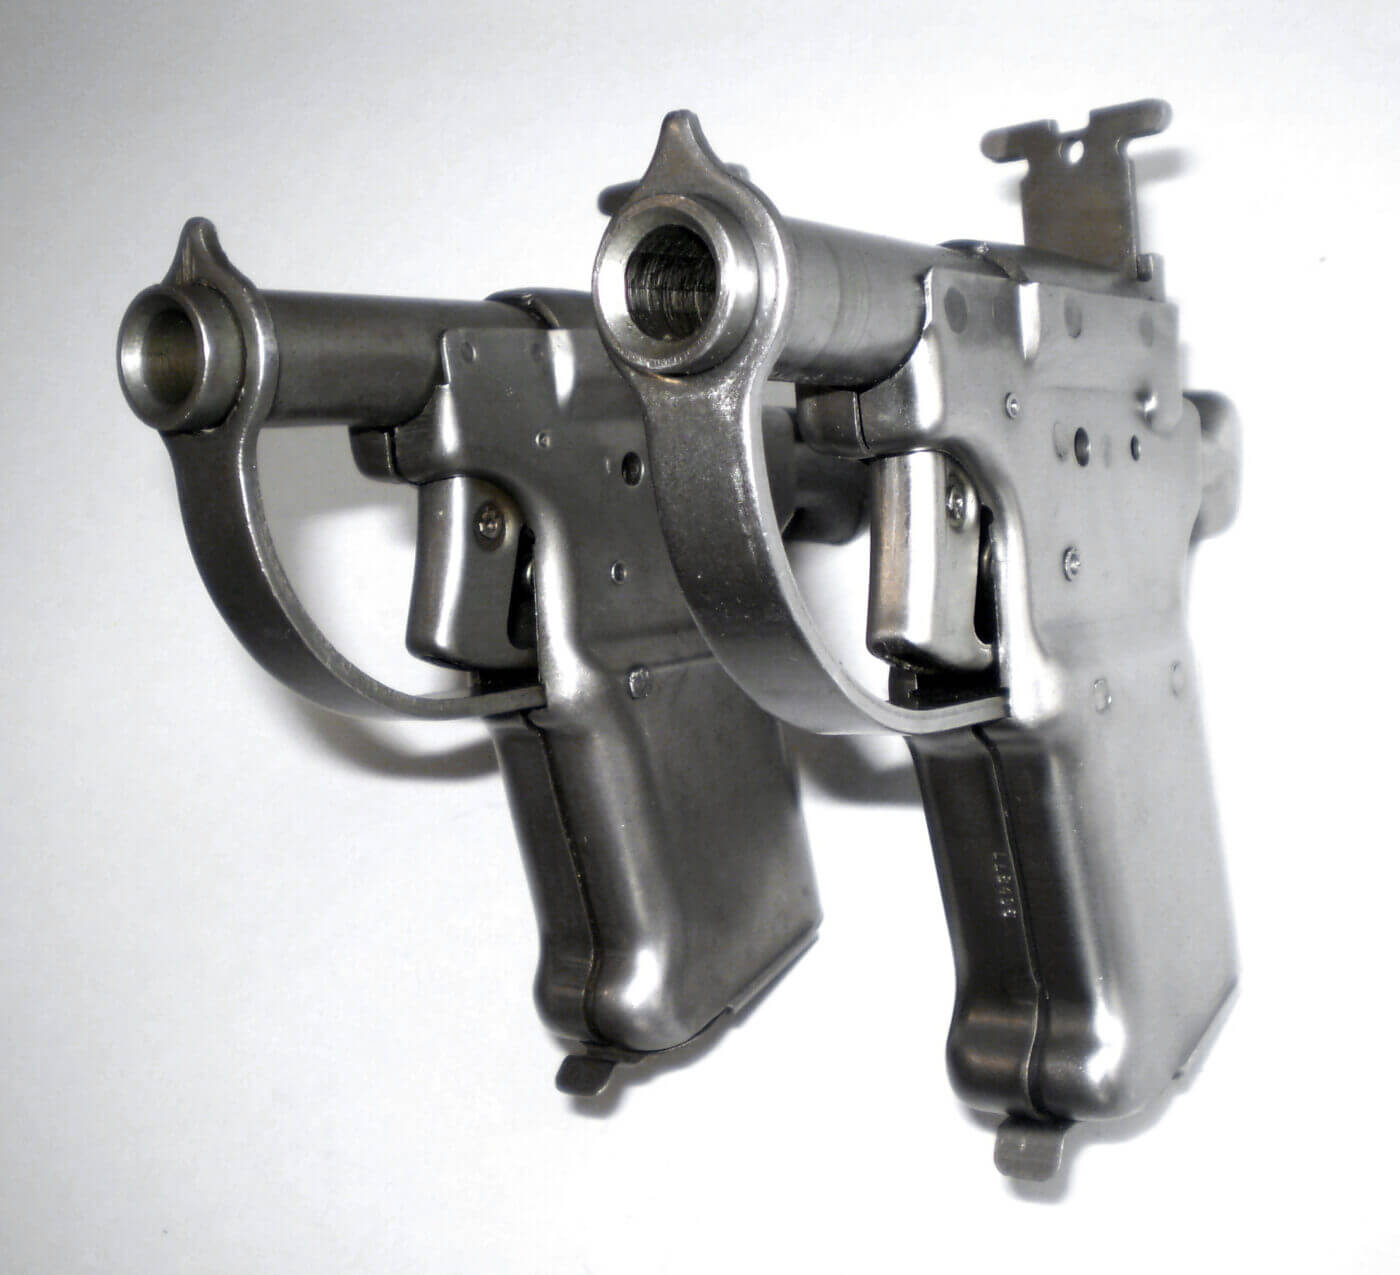 Reproduction Liberator pistol compared to an original